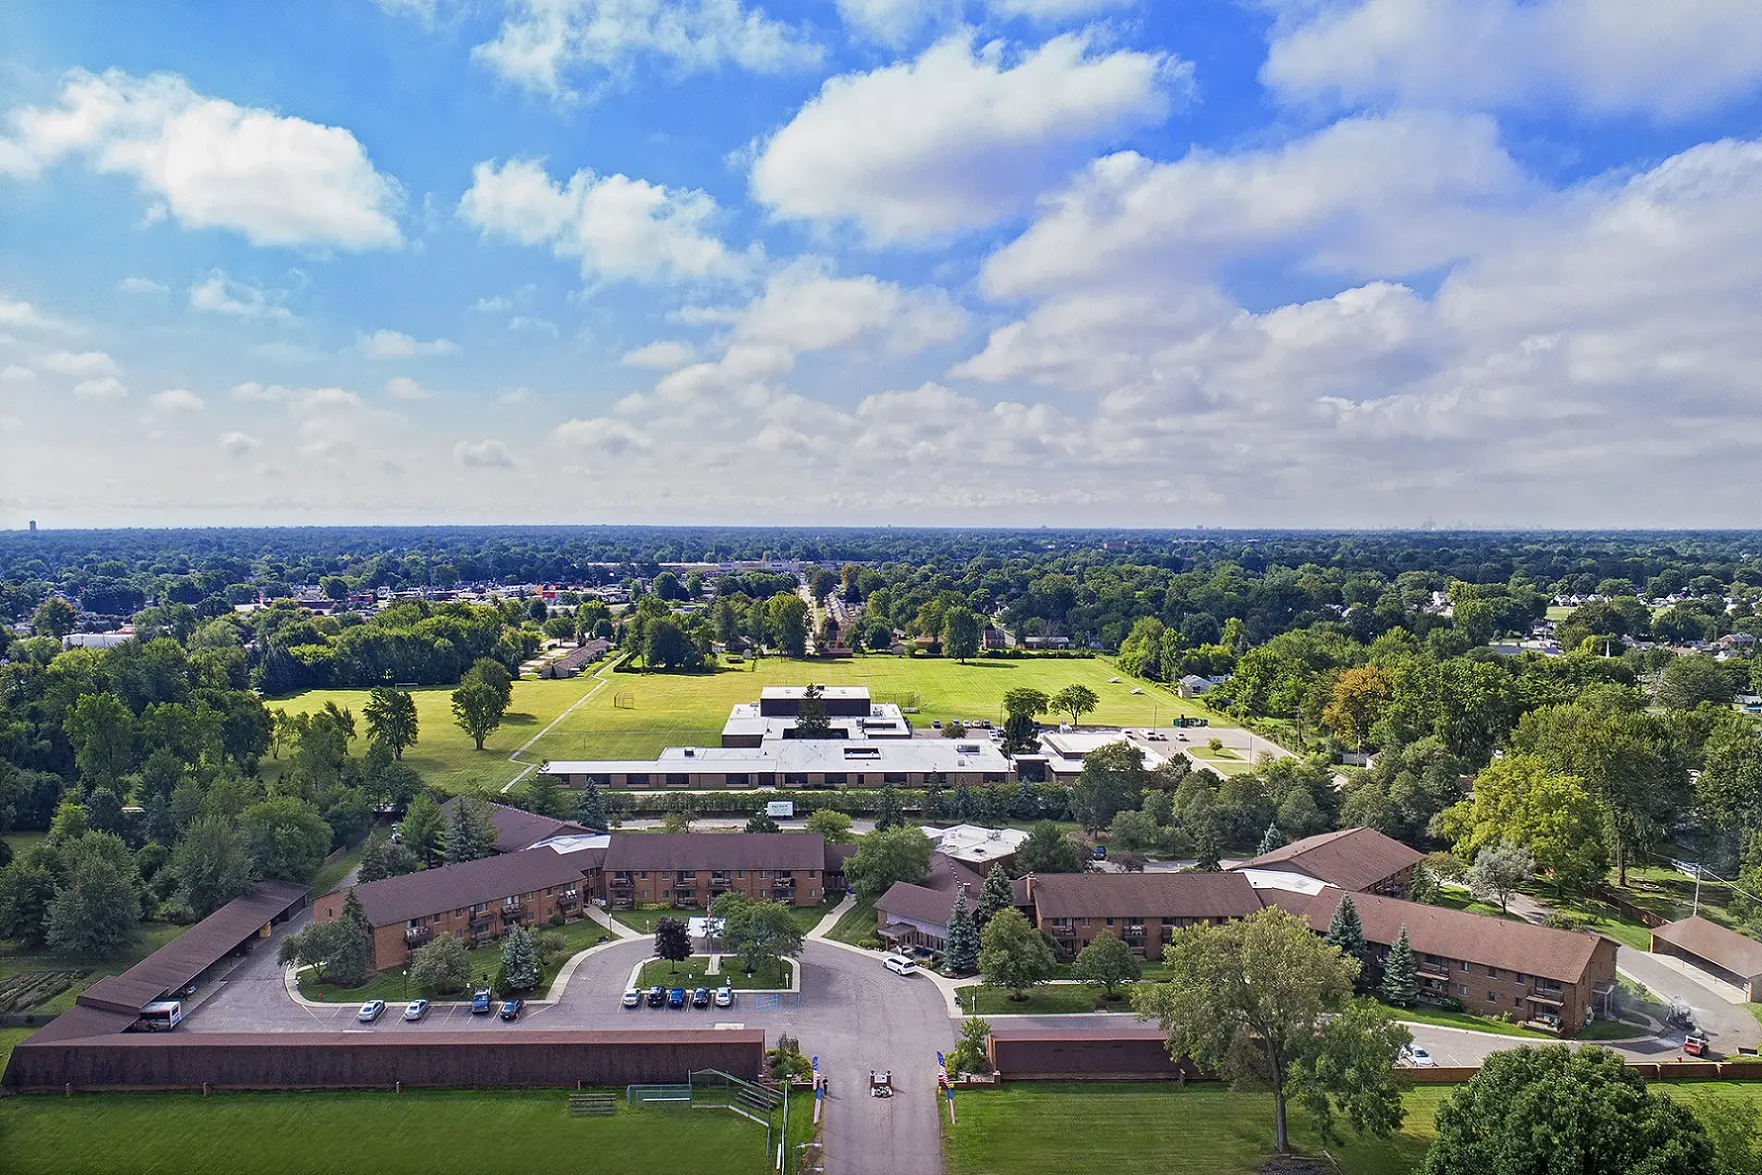 Bird's eye view of American House East II, a senior living community in Roseville, Michigan